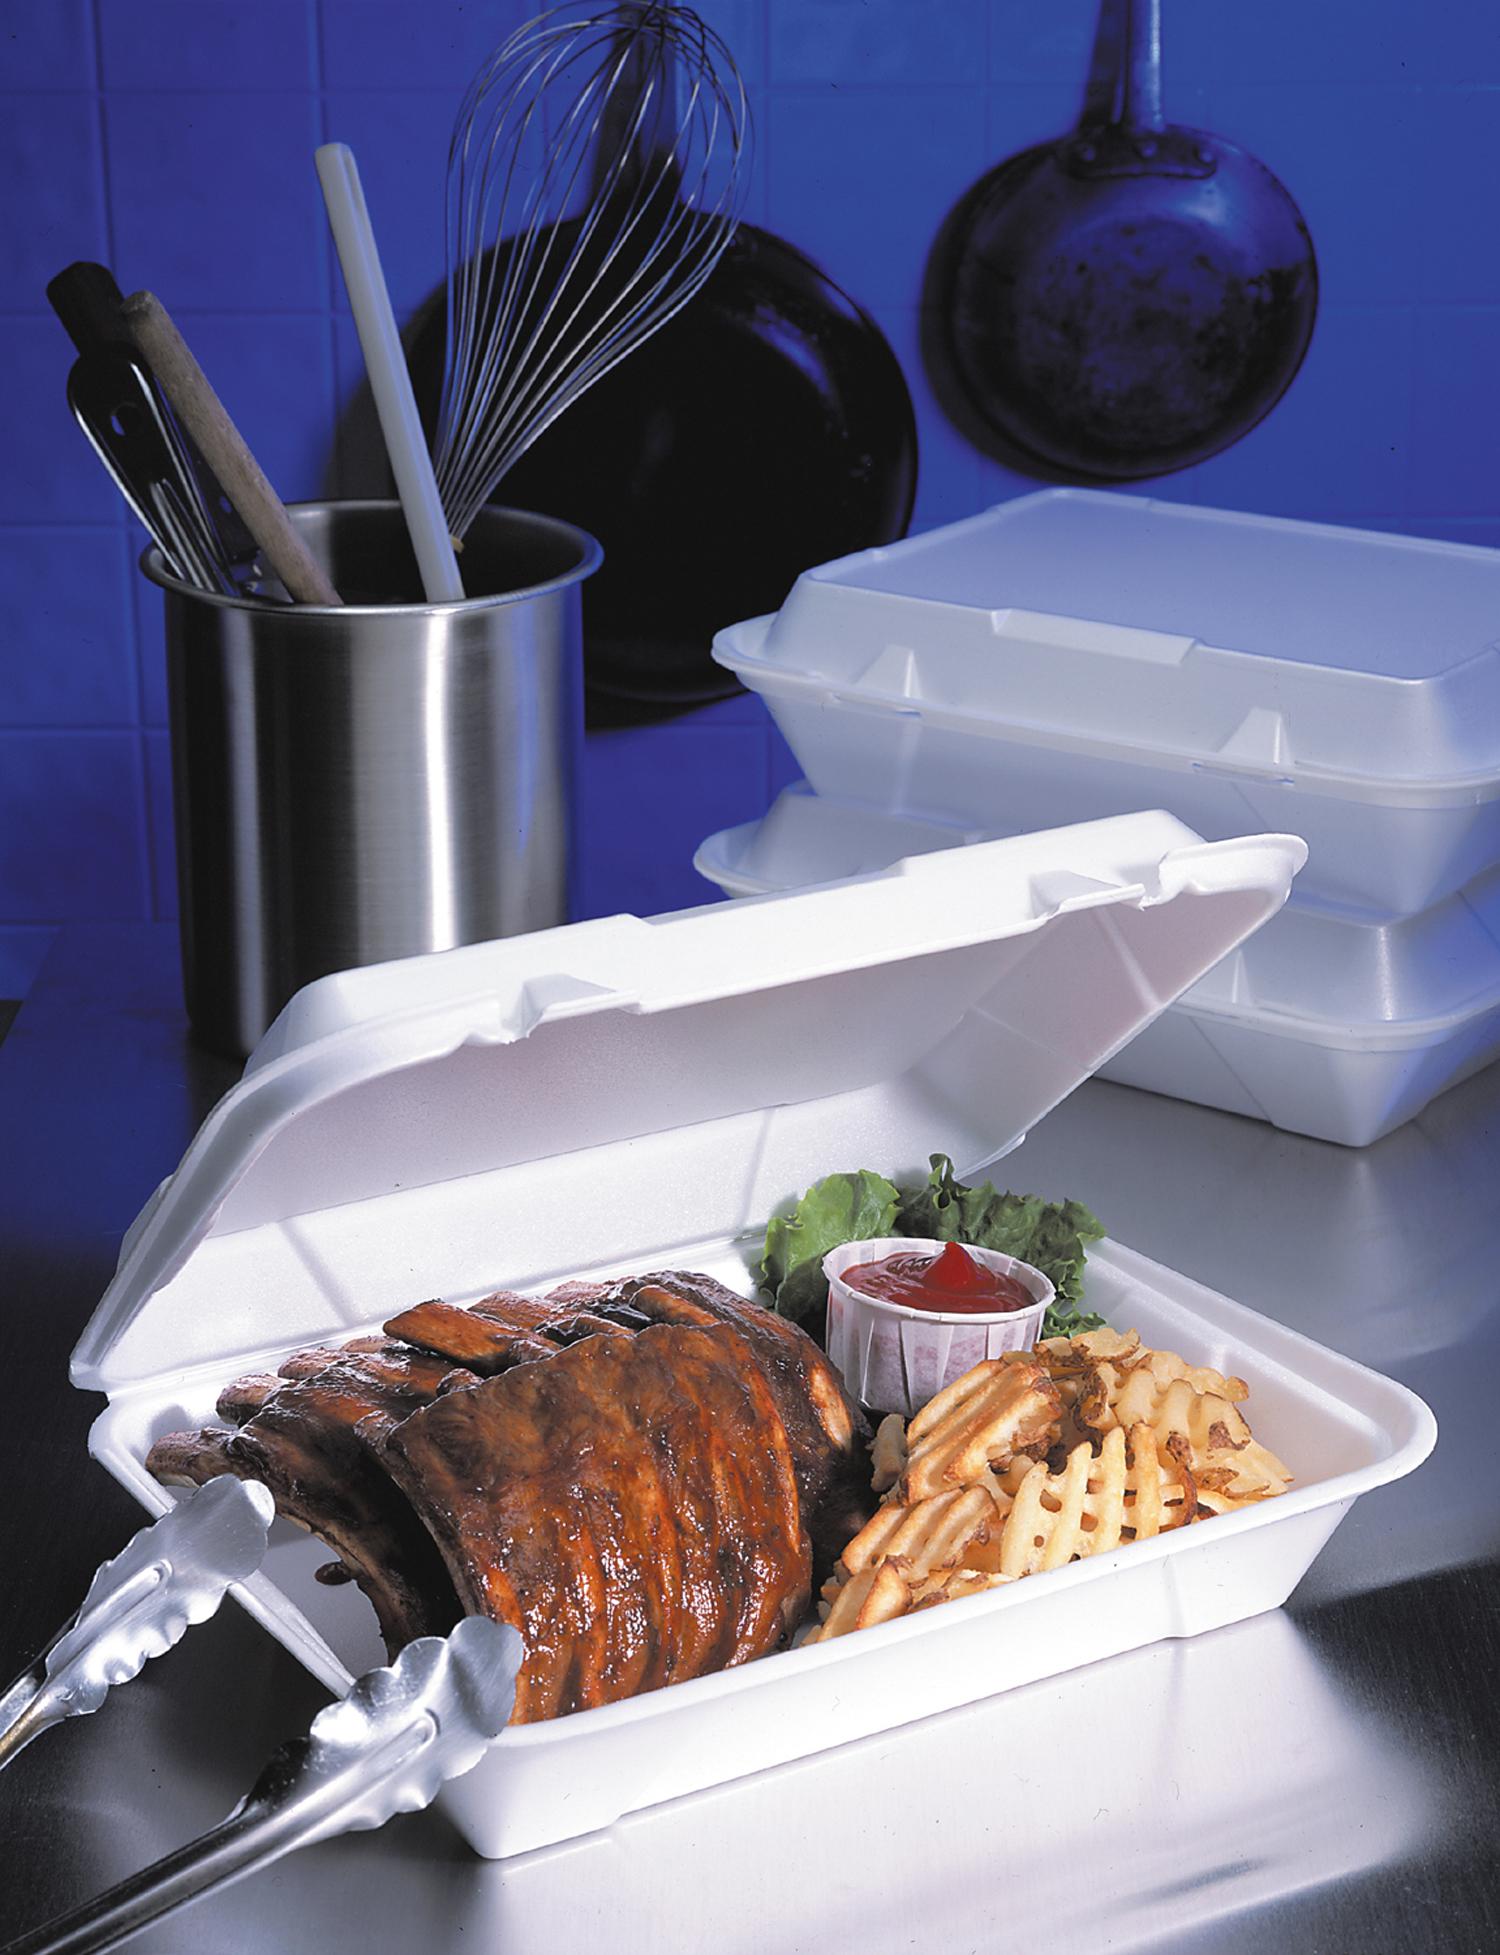 The Foam Recycling Coalition (FRC) was formed under the Foodservice Packaging Institute in 2014 to support increased recycling of foodservice packaging made from polystyrene foam.